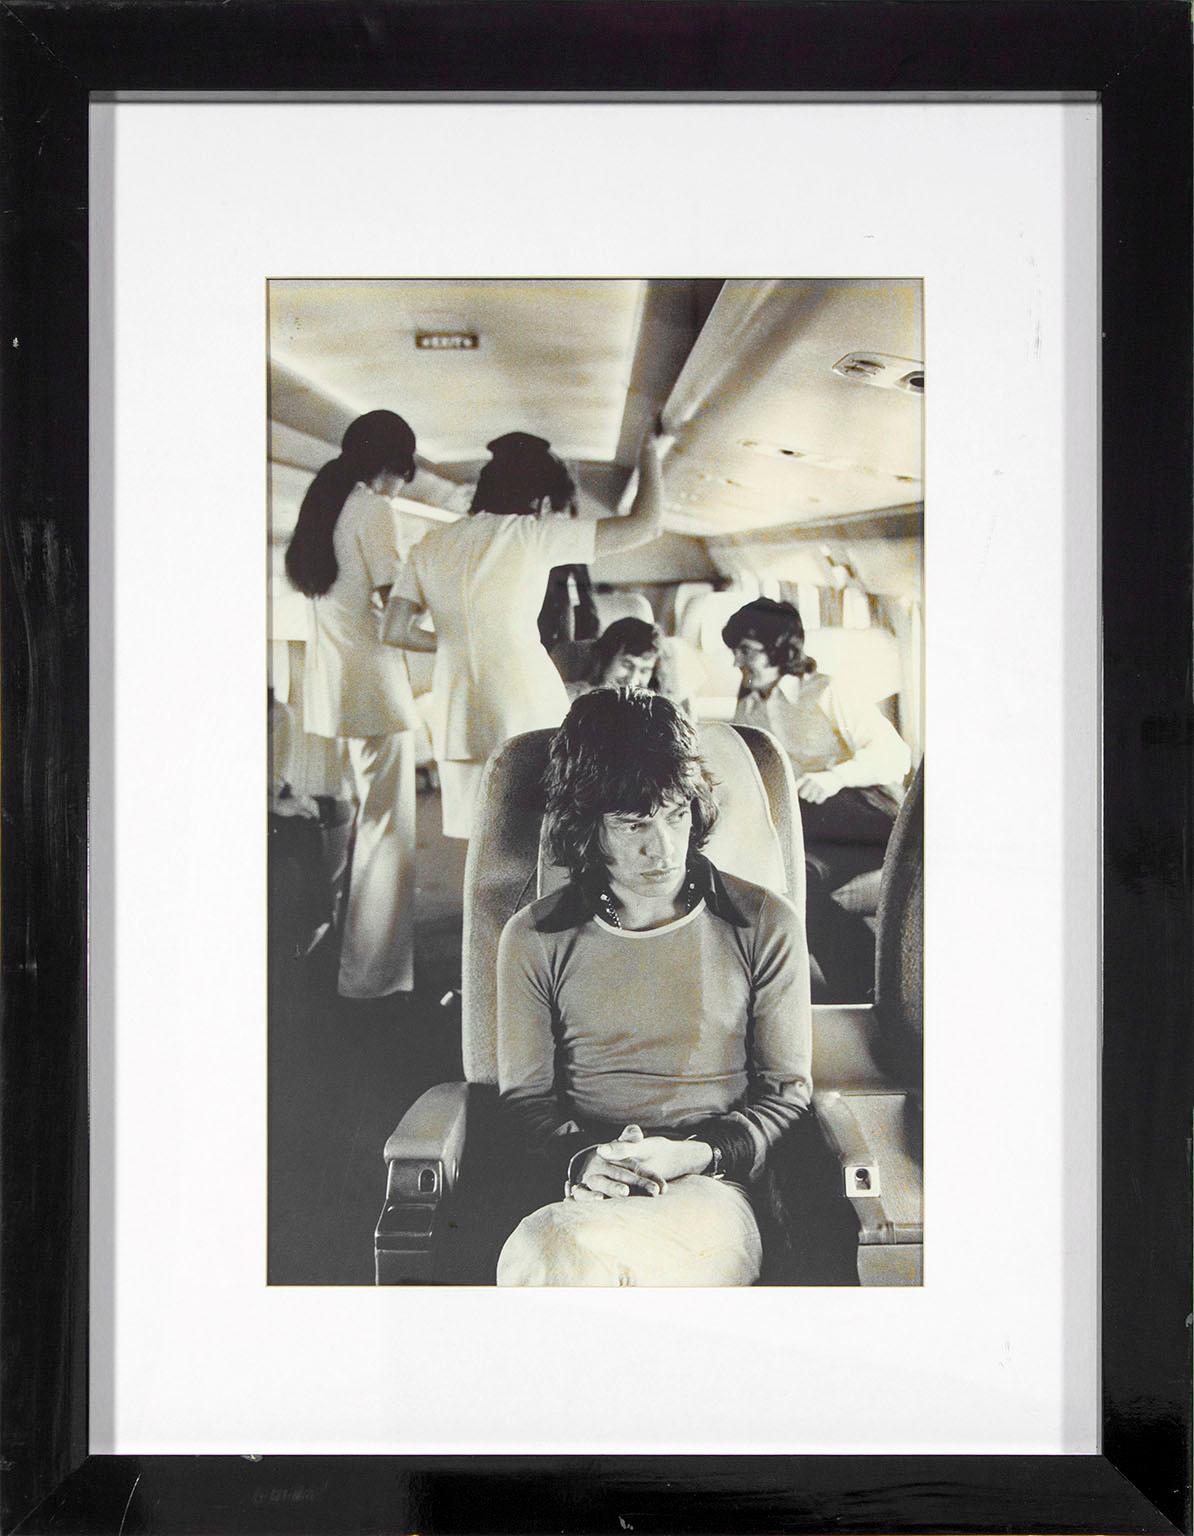 "Mick Jagger on Tour Plane 1972" black and white photograph by Jim Marshall. Image size: 22 1/2 x 14 1/2 inches. This framed photograph was previously displayed in a guest room of the Hard Rock Hotel and Casino in Las Vegas, Nevada, and comes with a